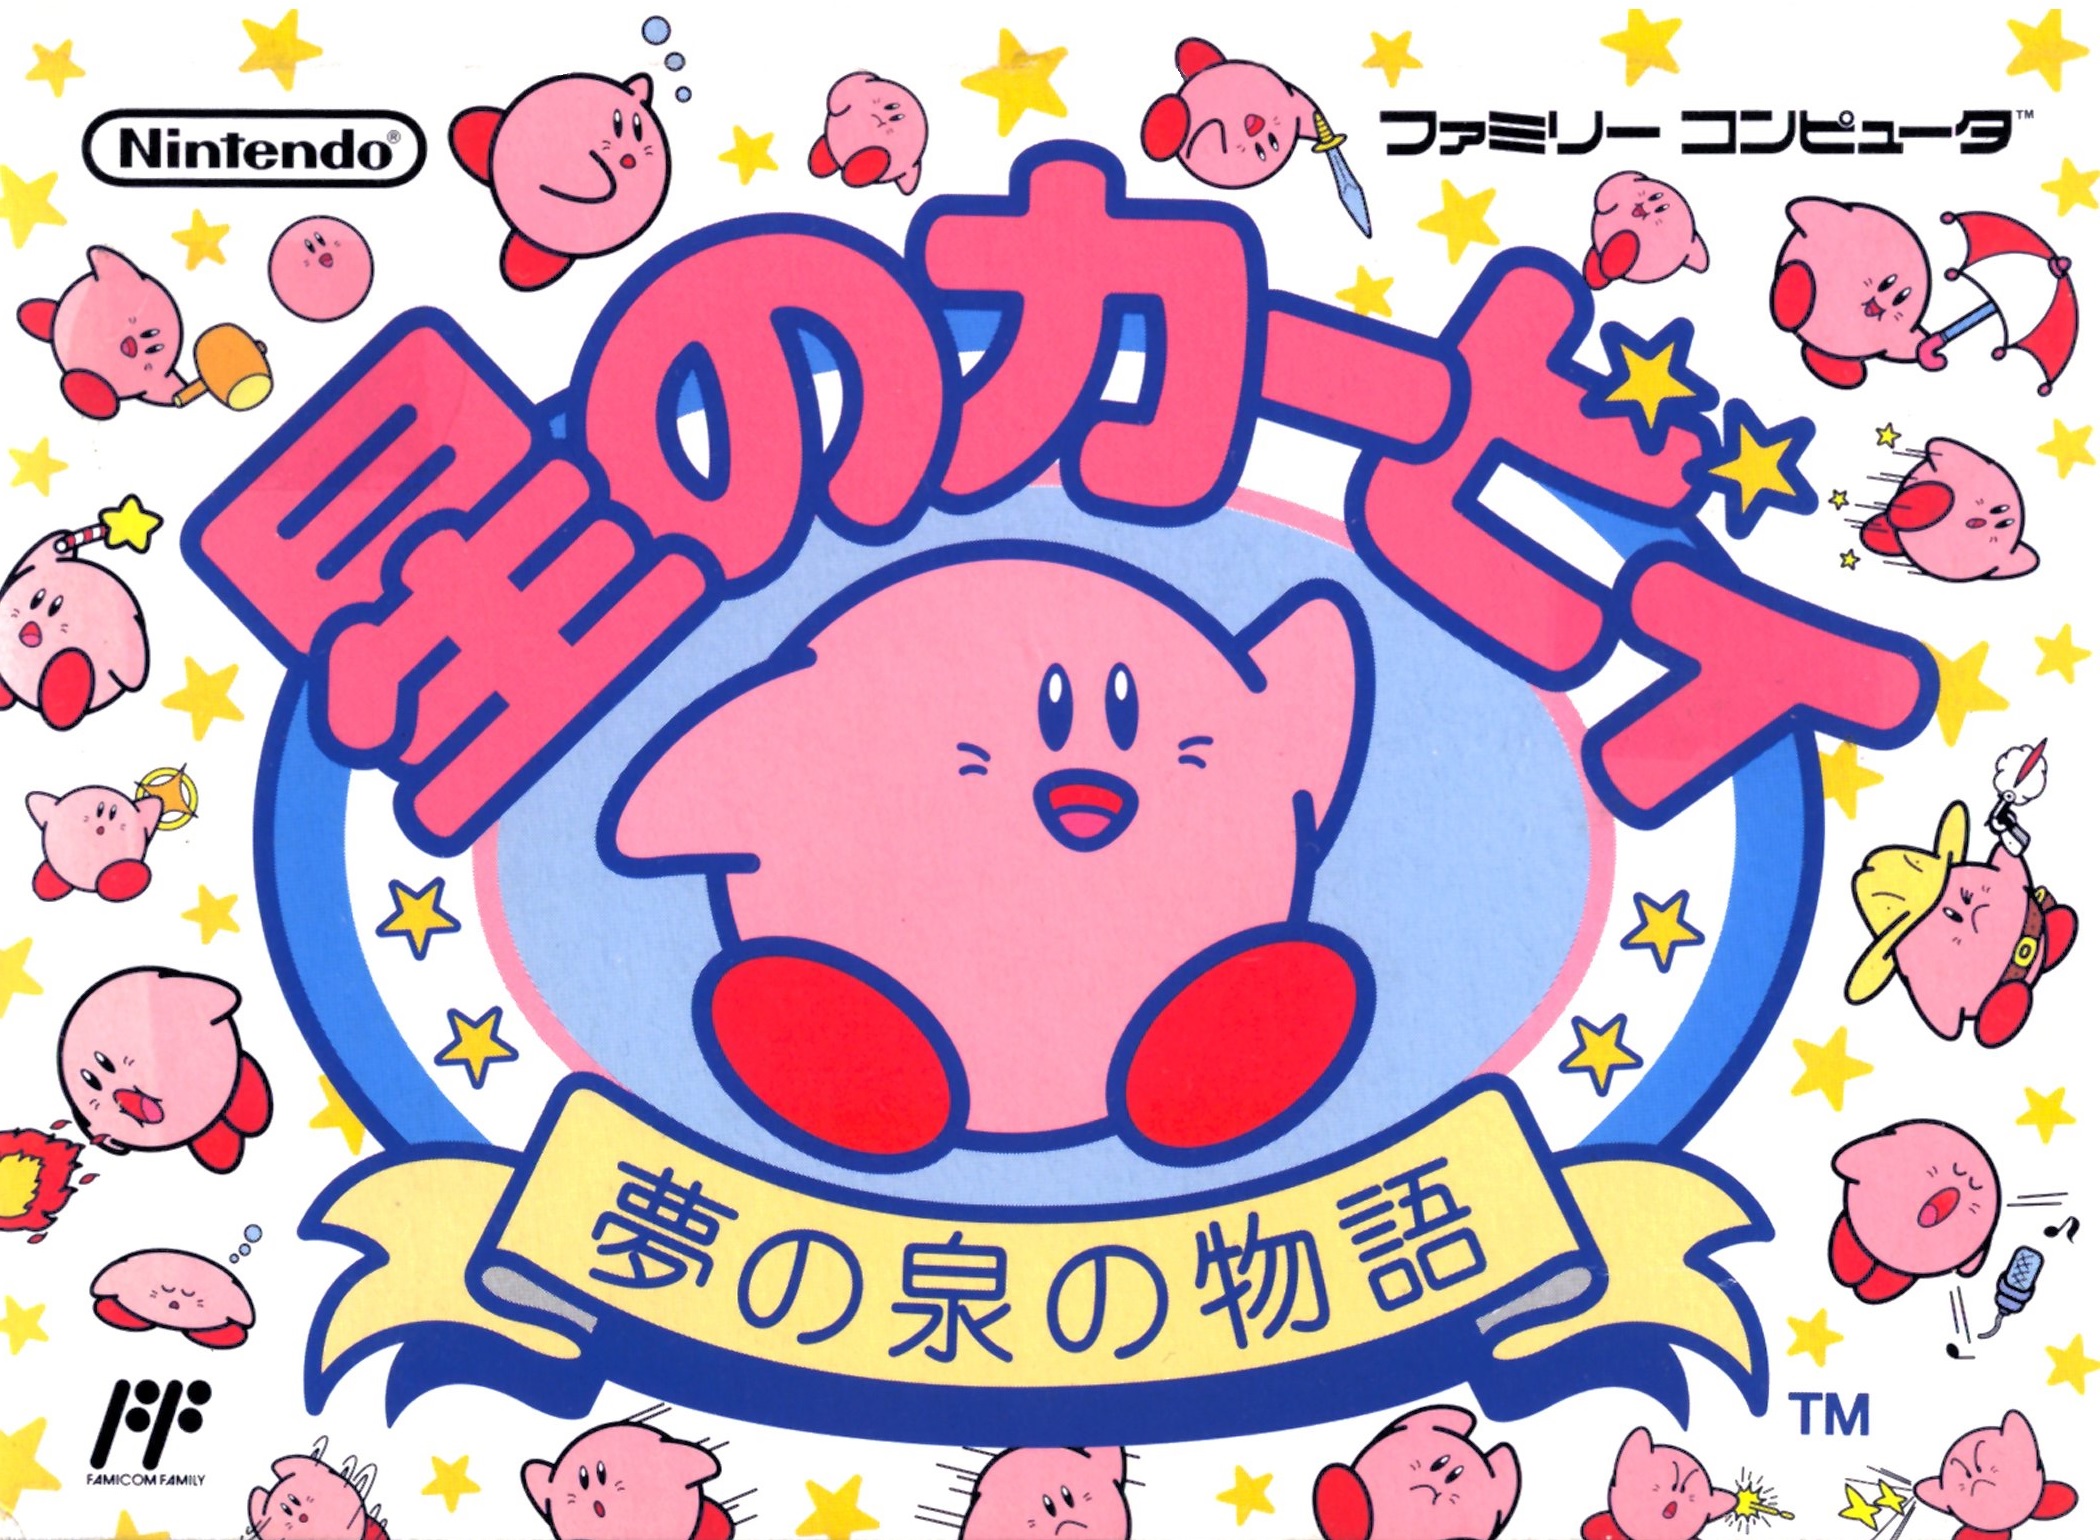 Kirby's Dream Land Characters guide Japanese Book game Kirby New